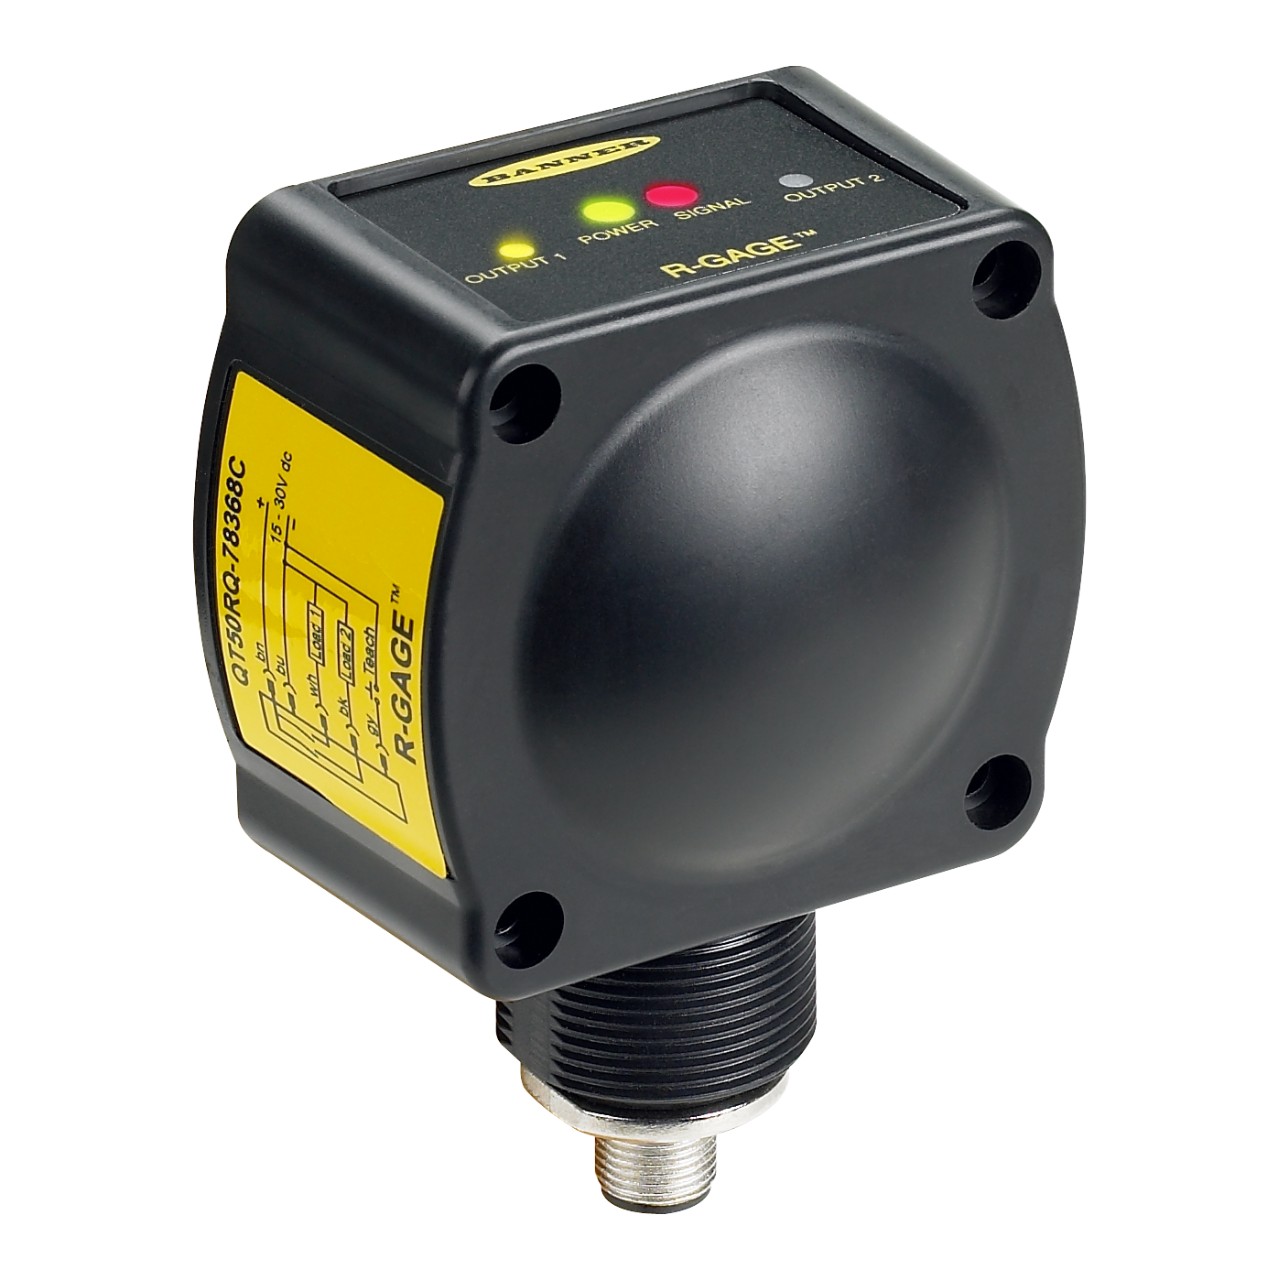 This R-GAGE QT50R-AFH Radar Sensor can be set up to detect obstructions within a specified distance range, ignoring any objects in the background.